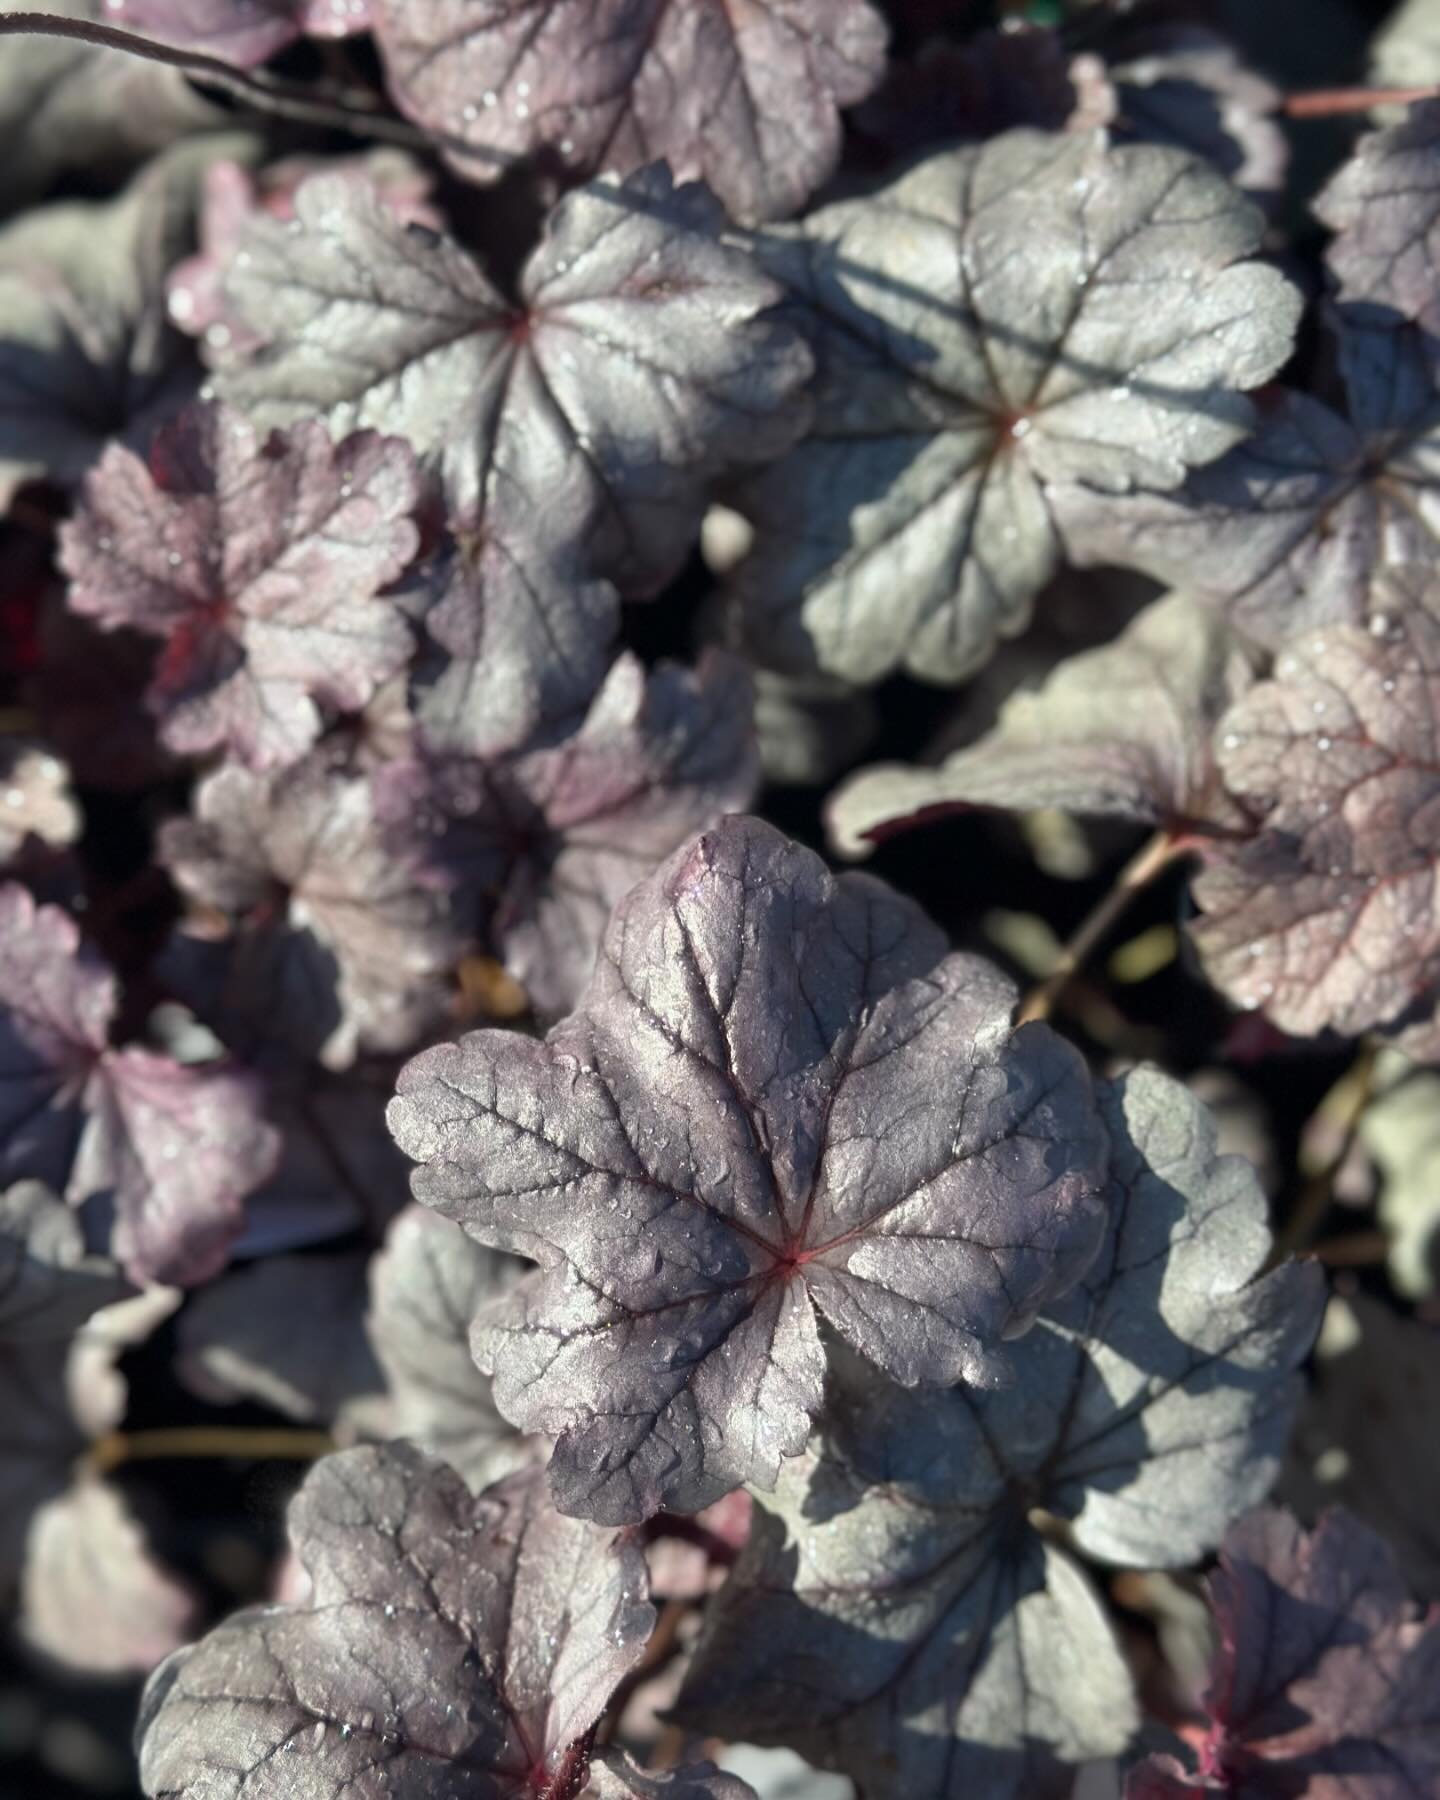 Who else loves heuchies?! Heuchera are such versatile plants. Shade? ✅ Sun? ✅ Part shade? ✅ Container? ✅ Landscape? ✅ Houseplant? ✅ you get the picture! These native plants come in a wide range of colors, soil and light options, and have both gorgeou